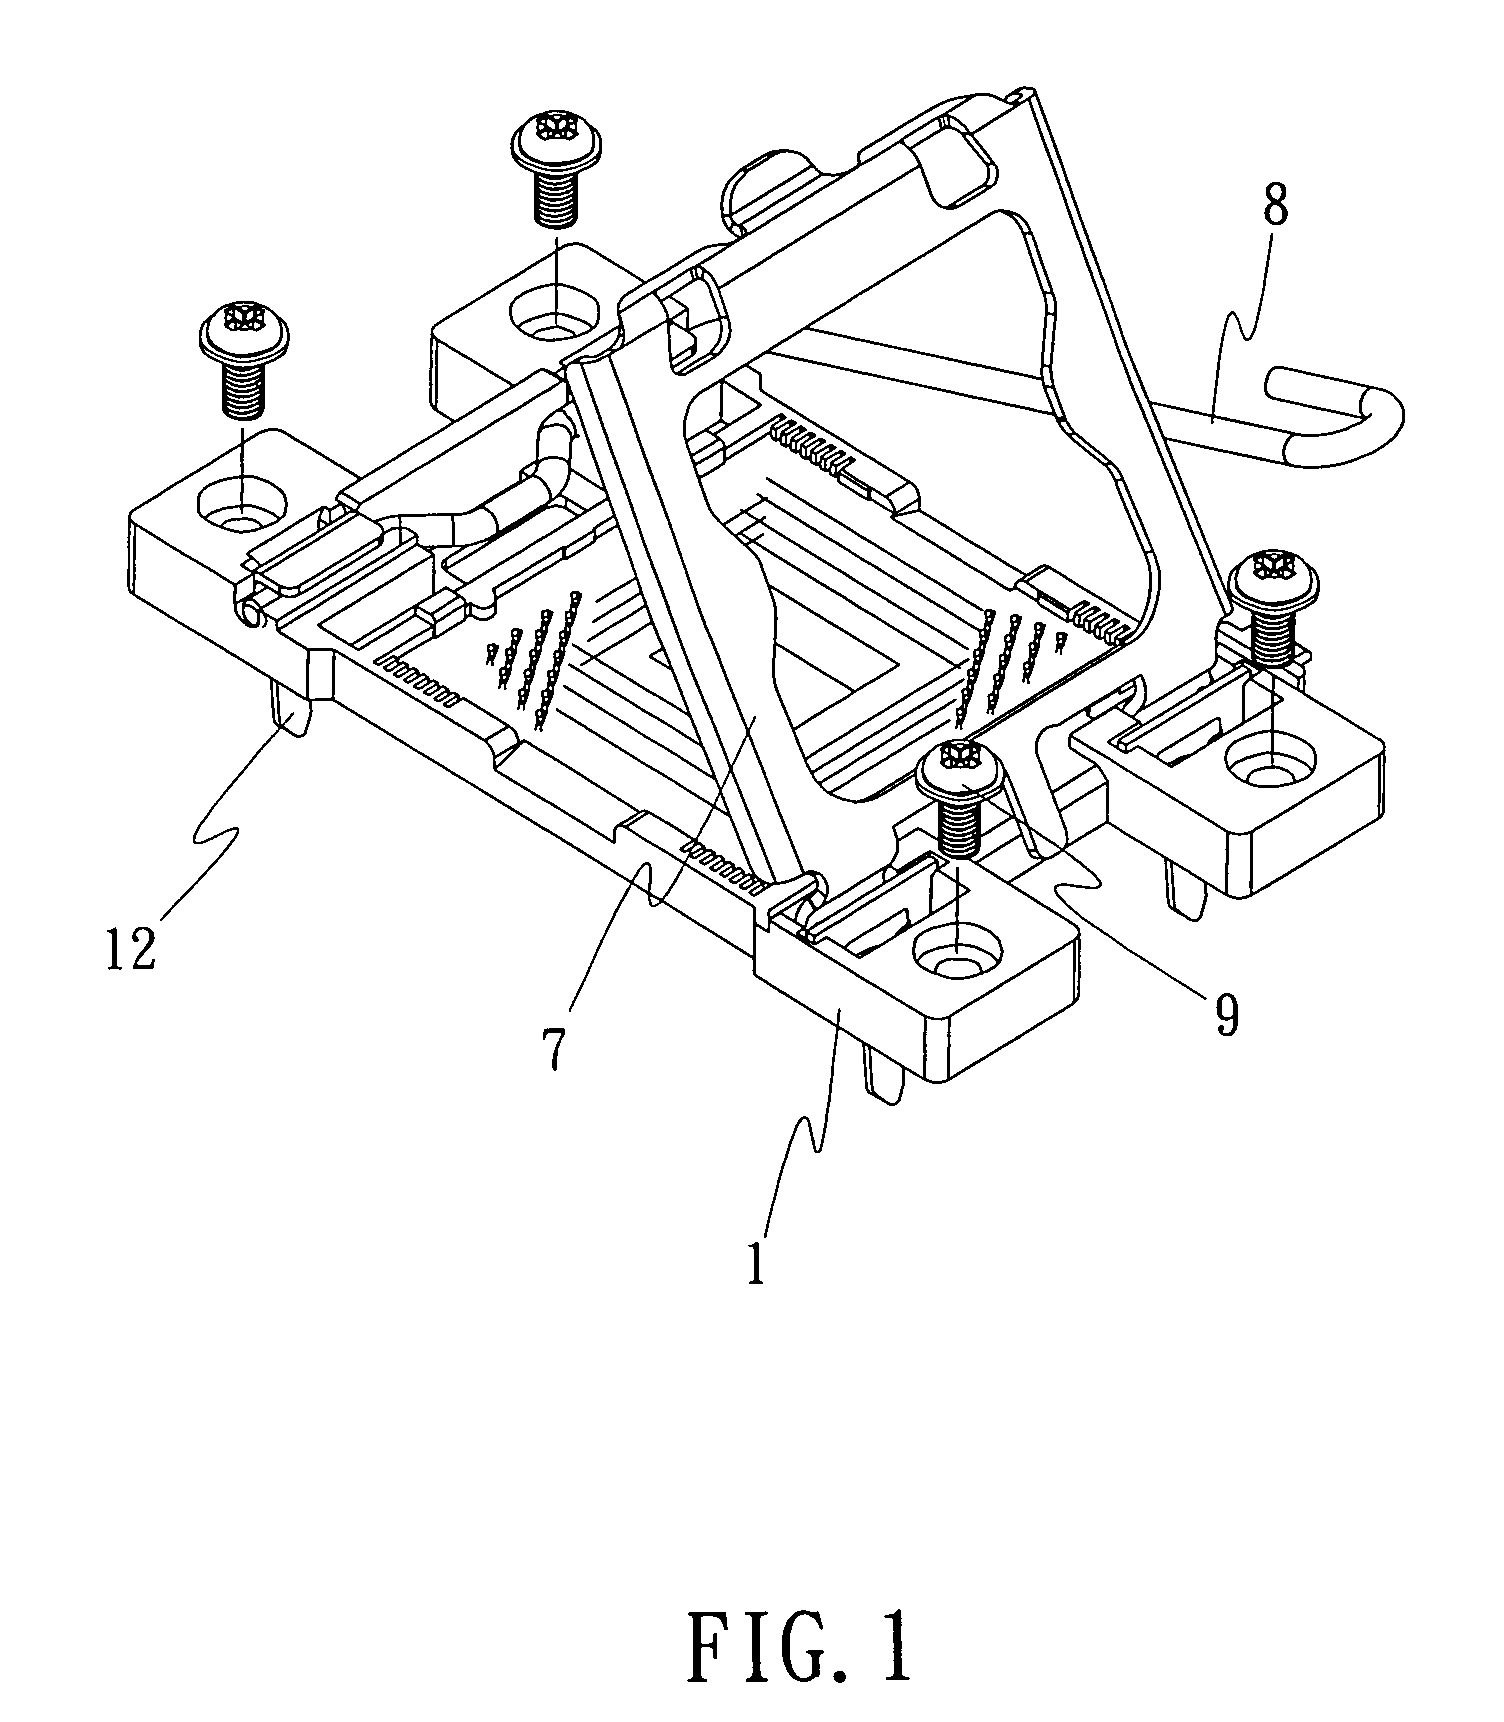 Electrical connector for a chip module